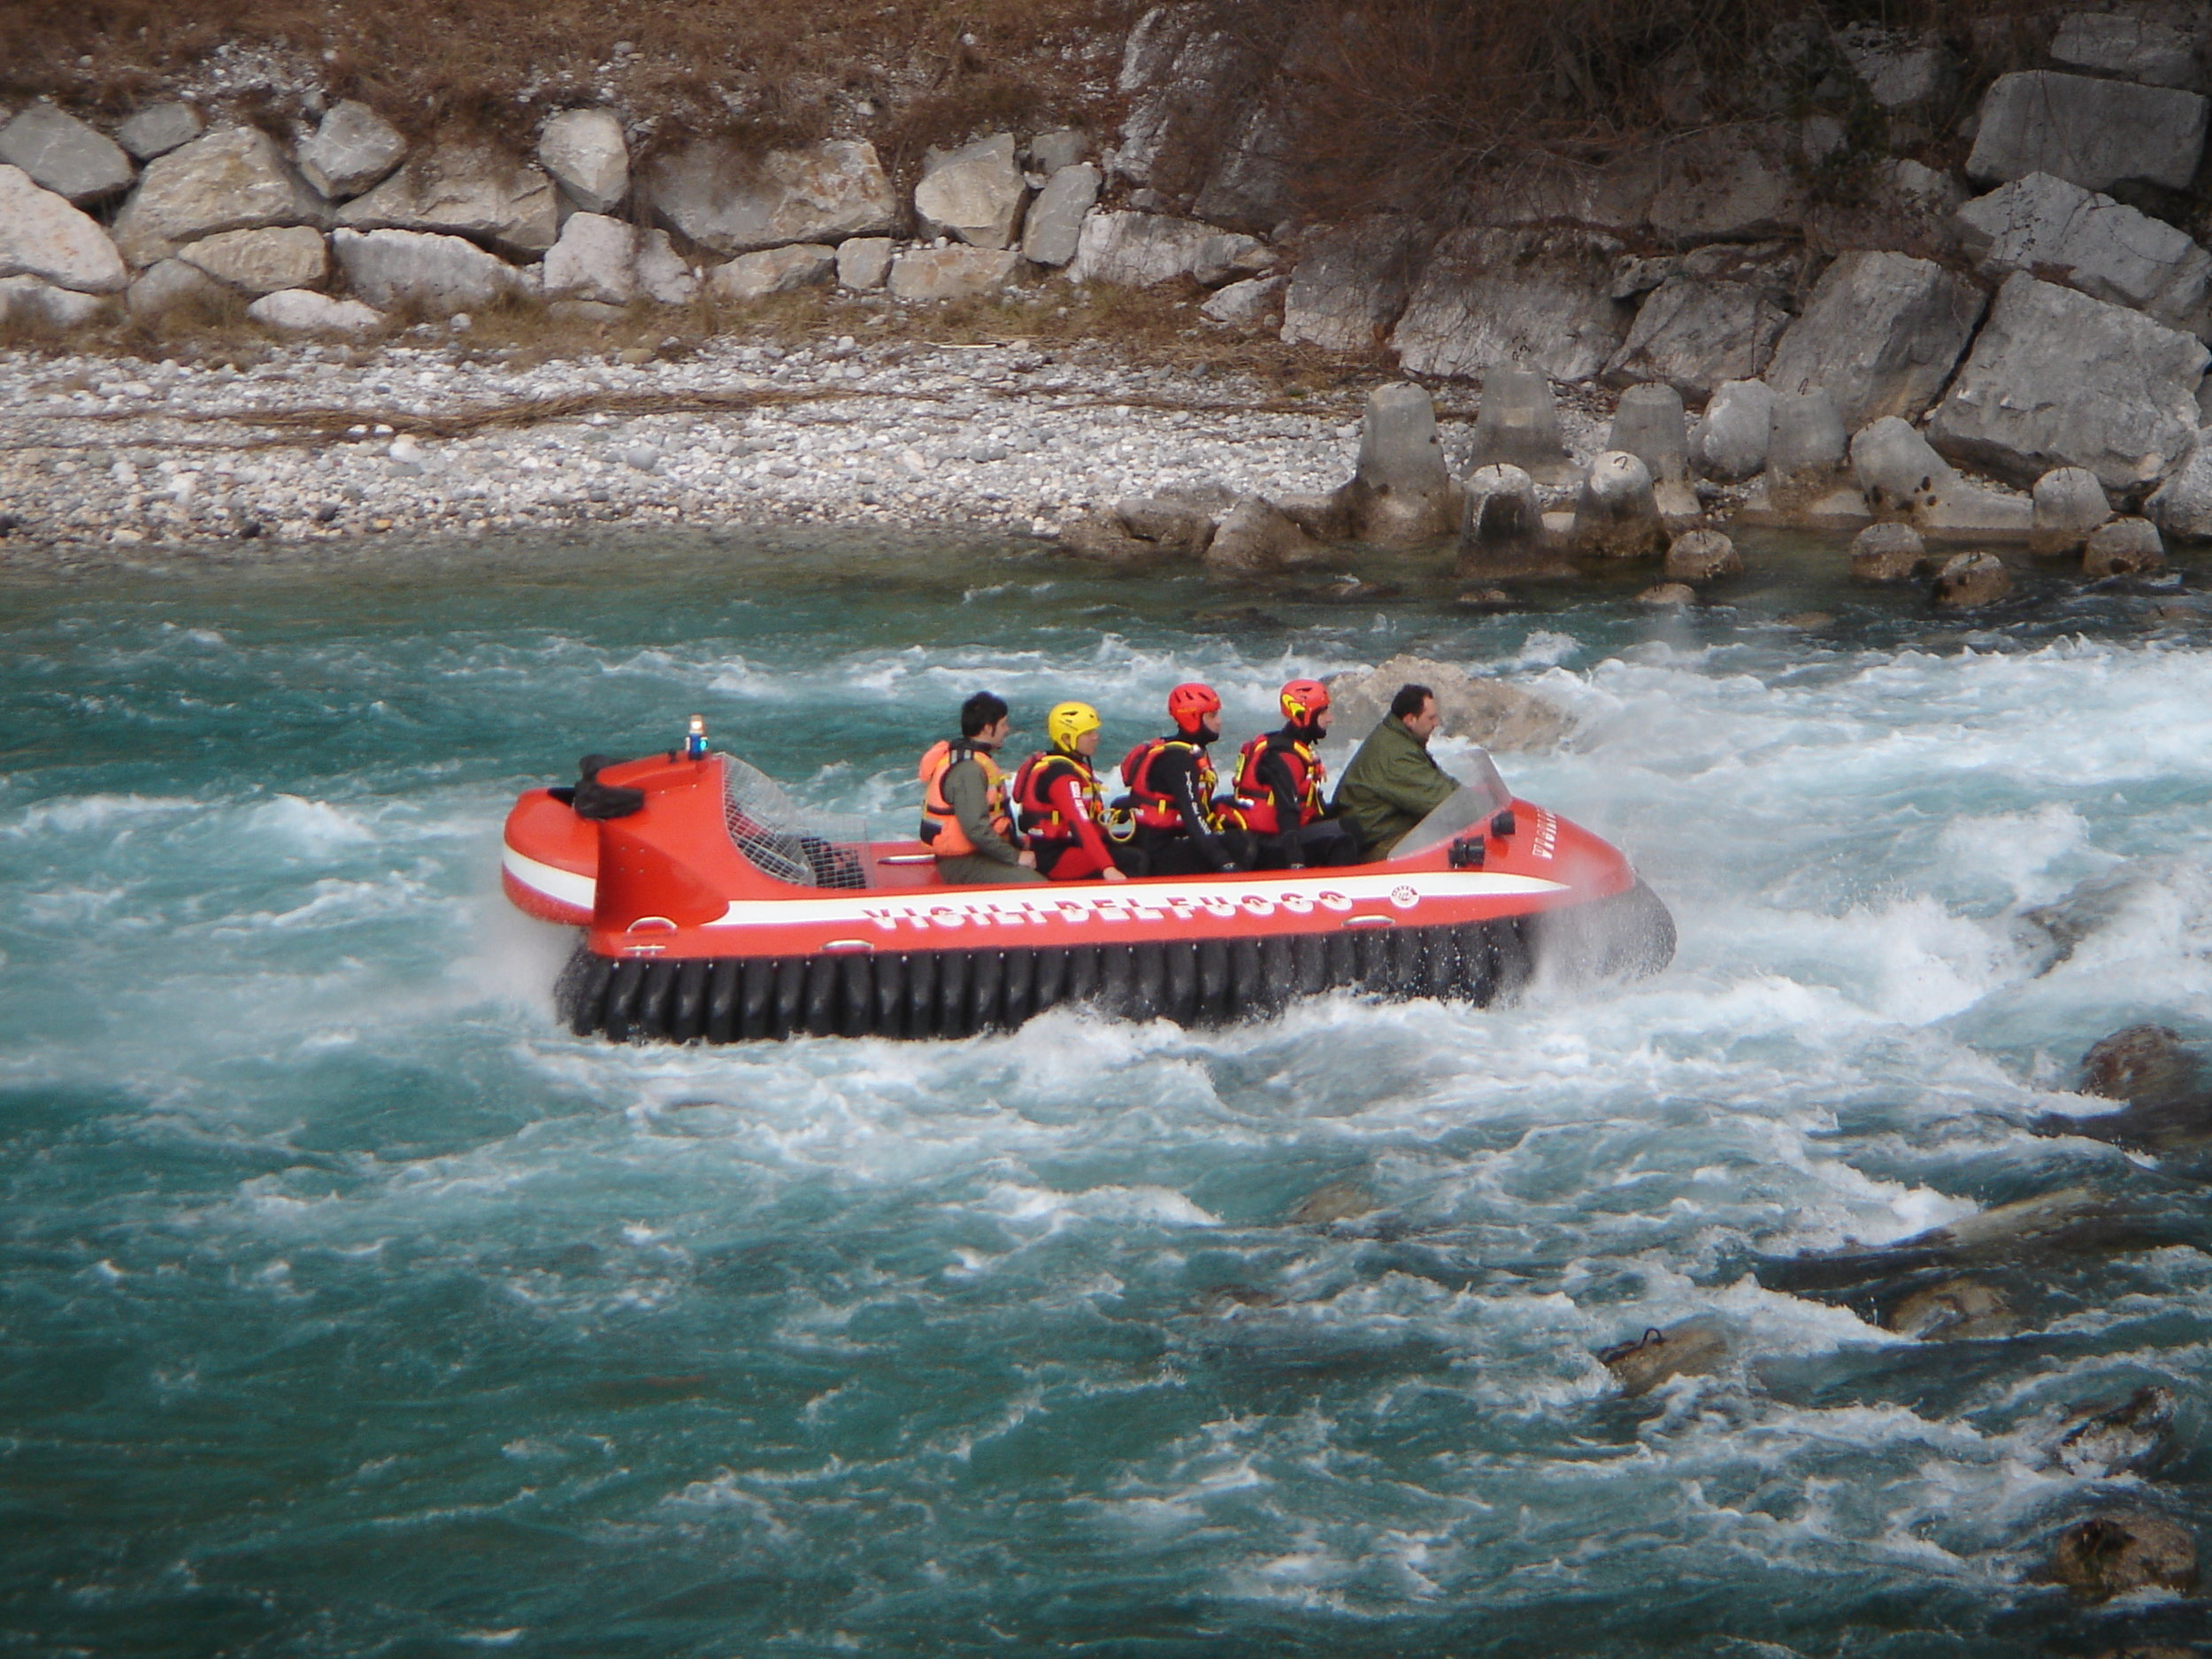  6 Passenger rescue craft being deployed in swift water, Italy 